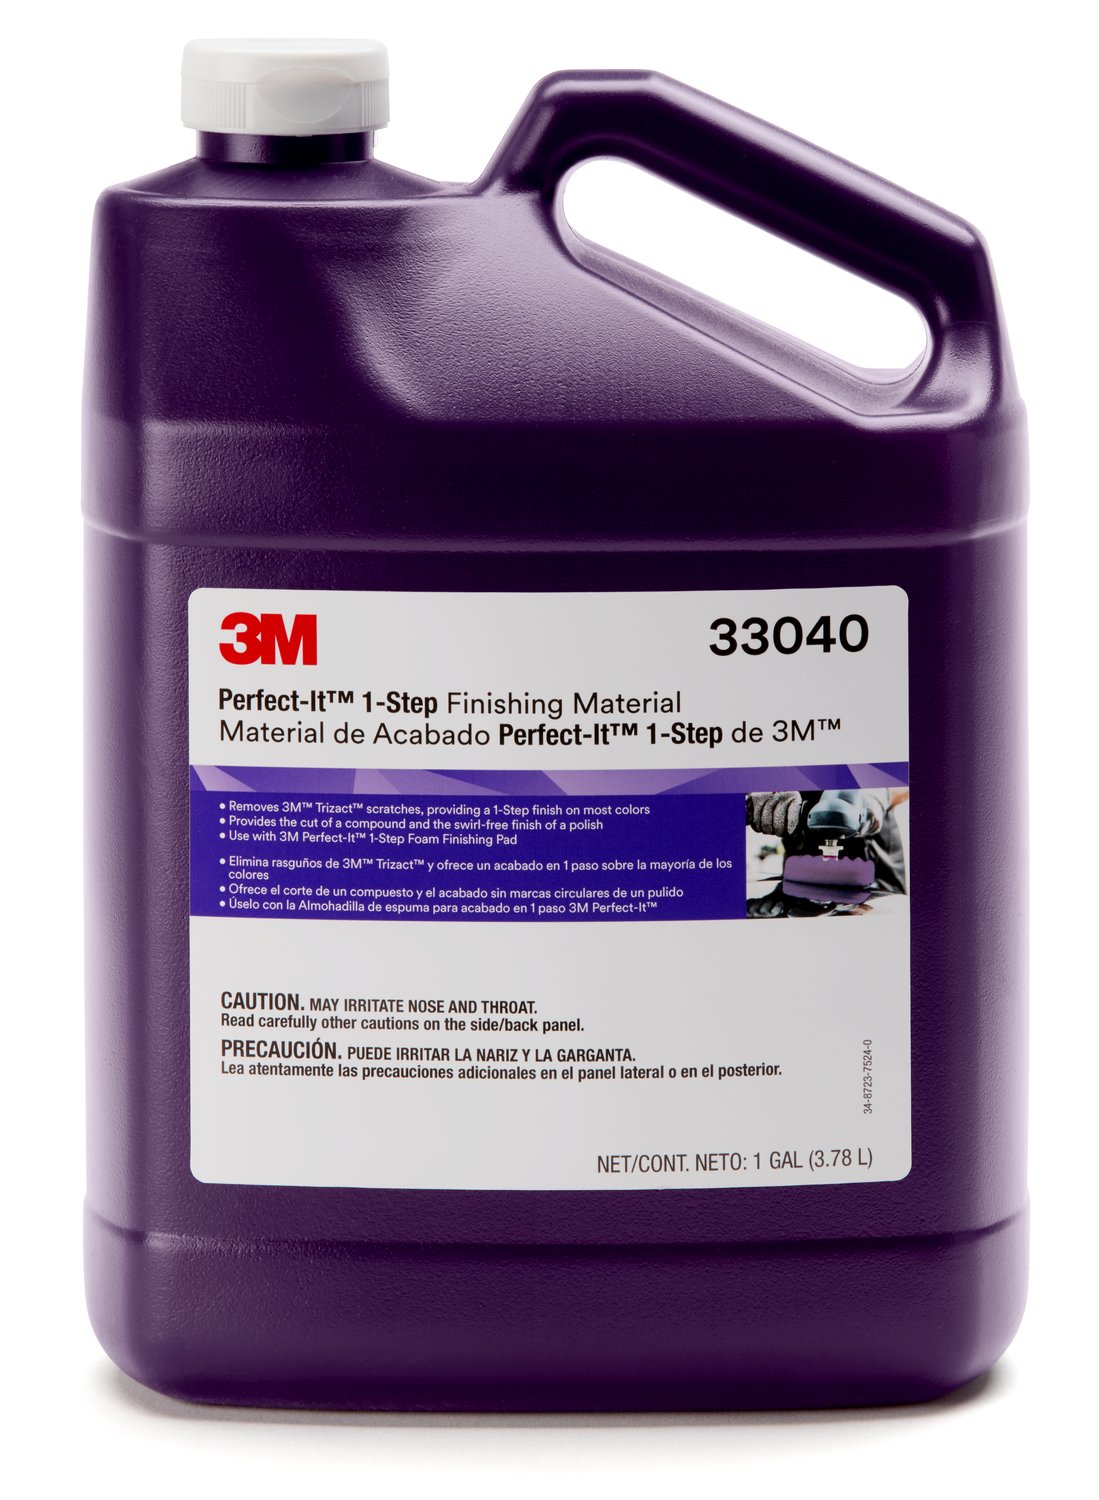 7100210658 - 3M Perfect-It 1-Step Finishing Material, 33040, 1 gal (8.82 lb), 4 per case